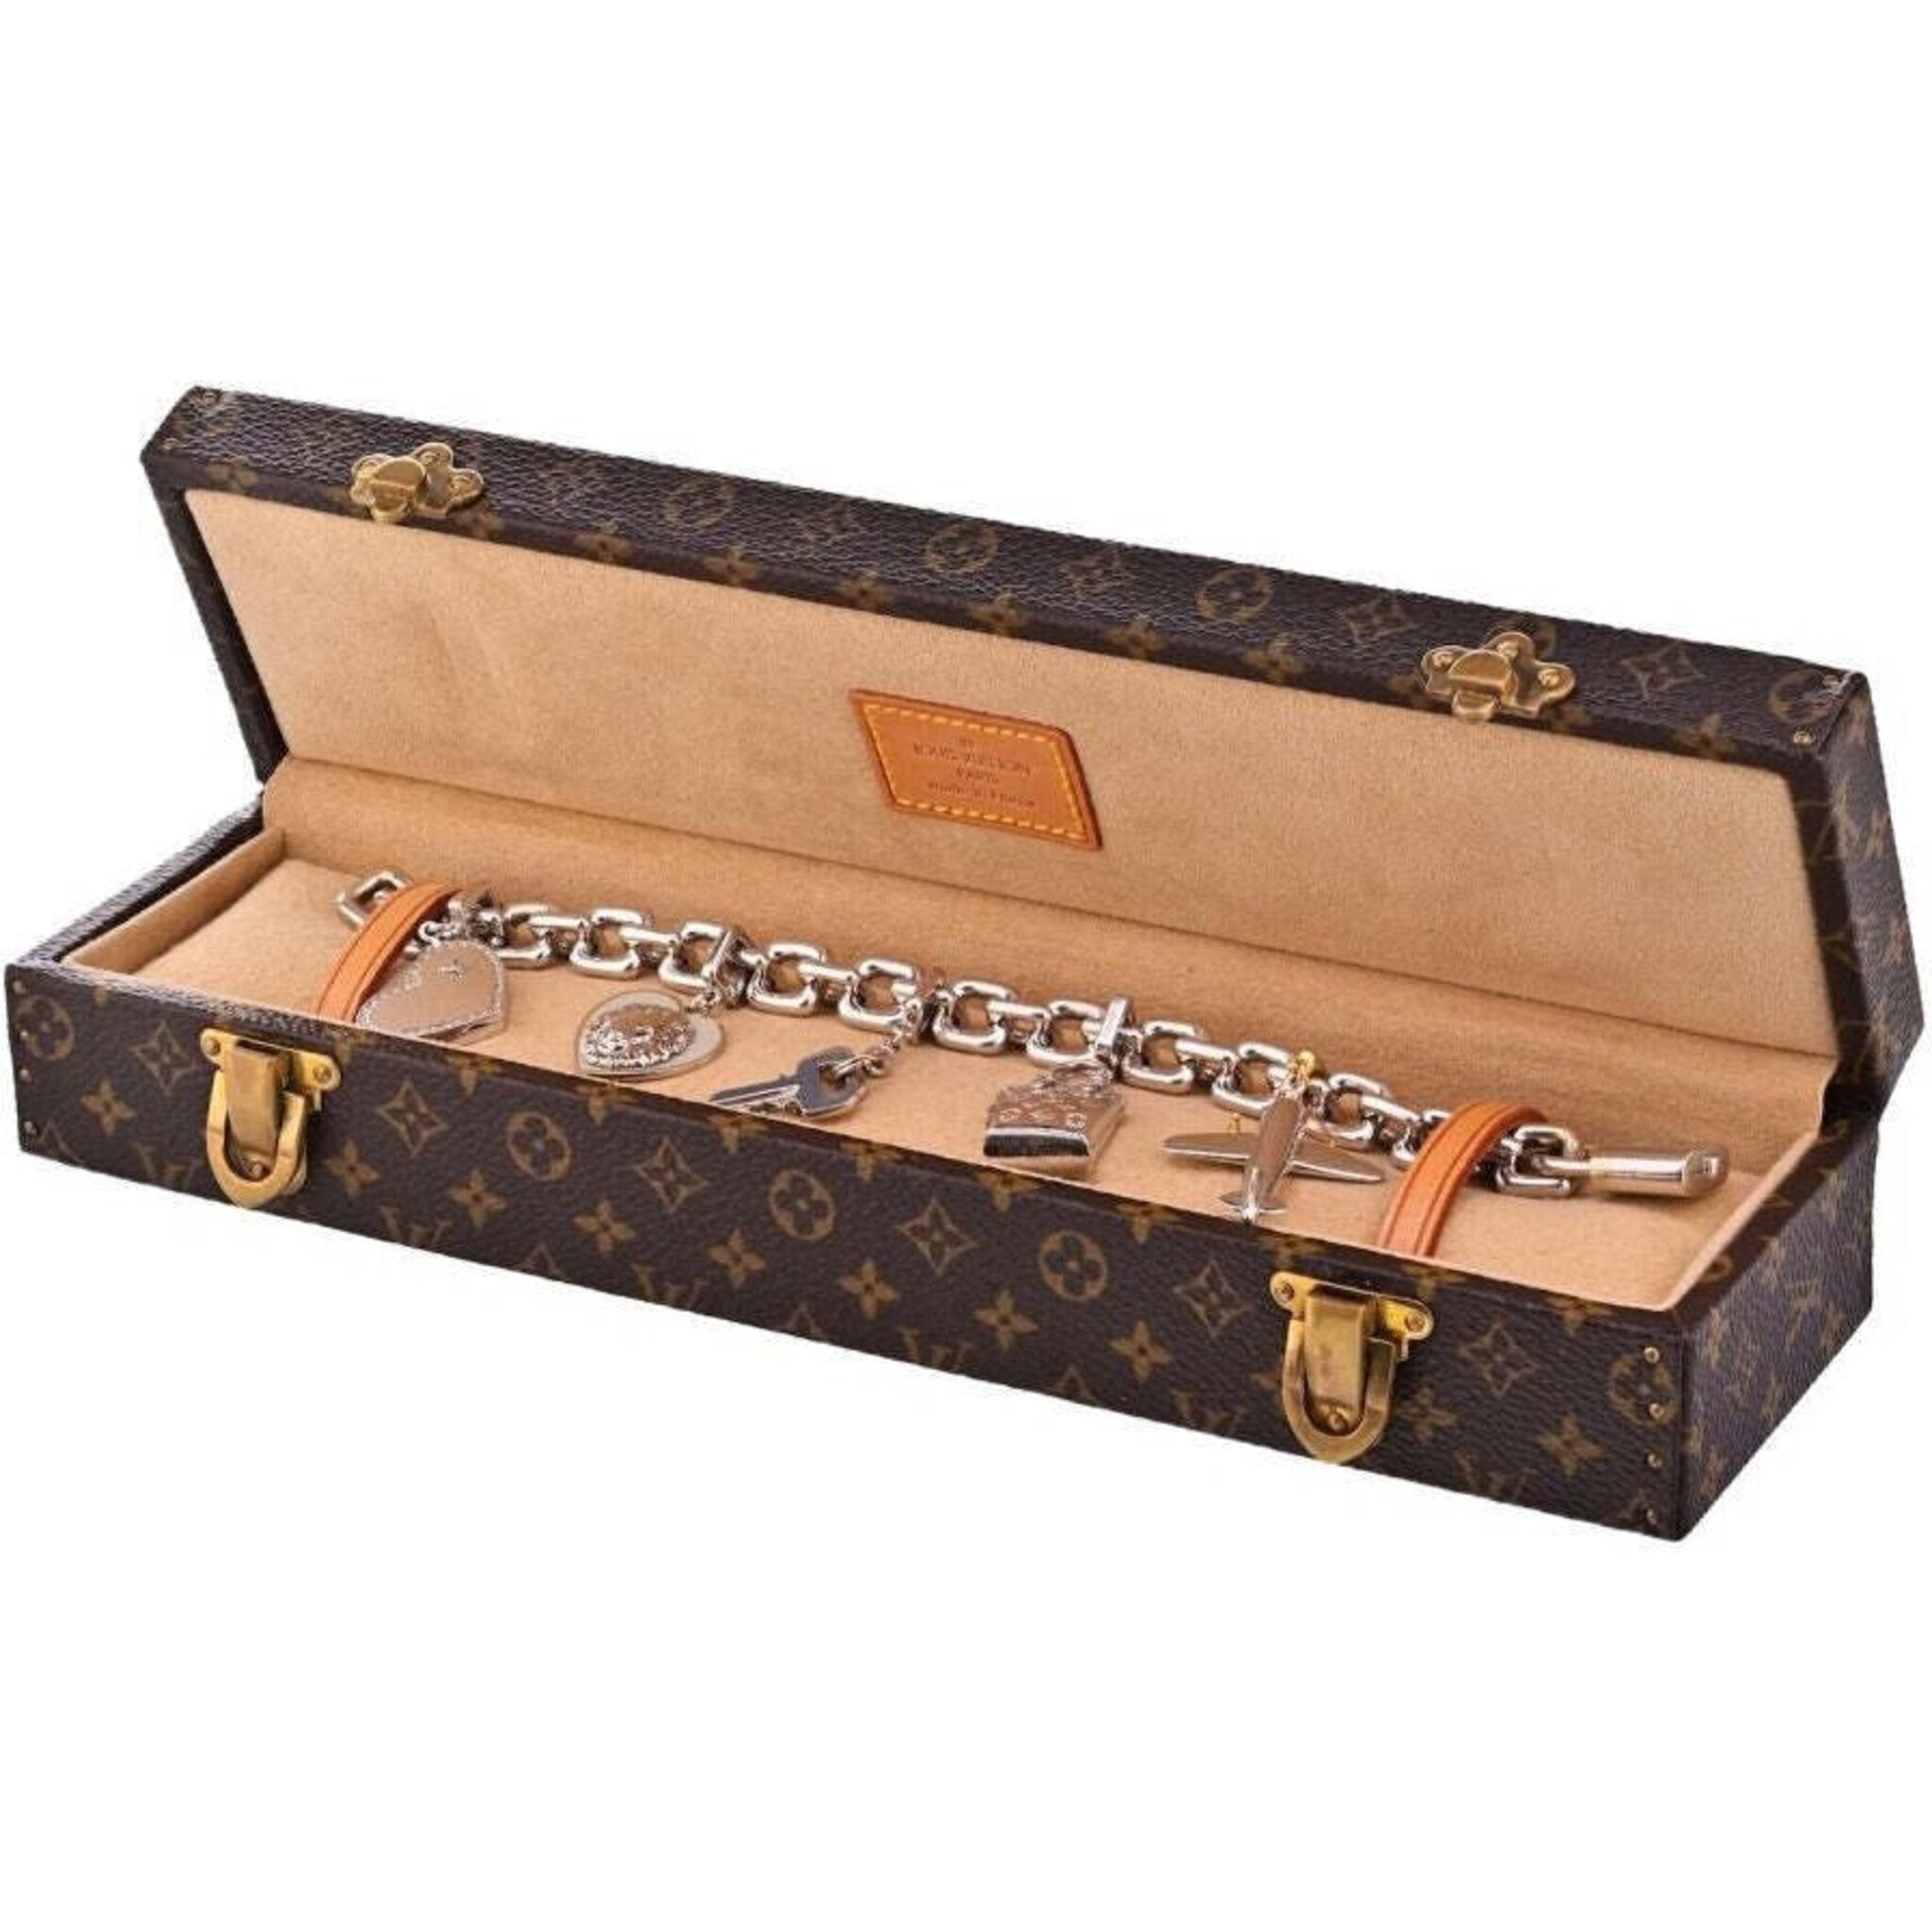 MAGNIFICENT LOUIS VUITTON 18K GOLD CHARM LUGGAGE BRACELET 7 CHARMS WITH  BOX